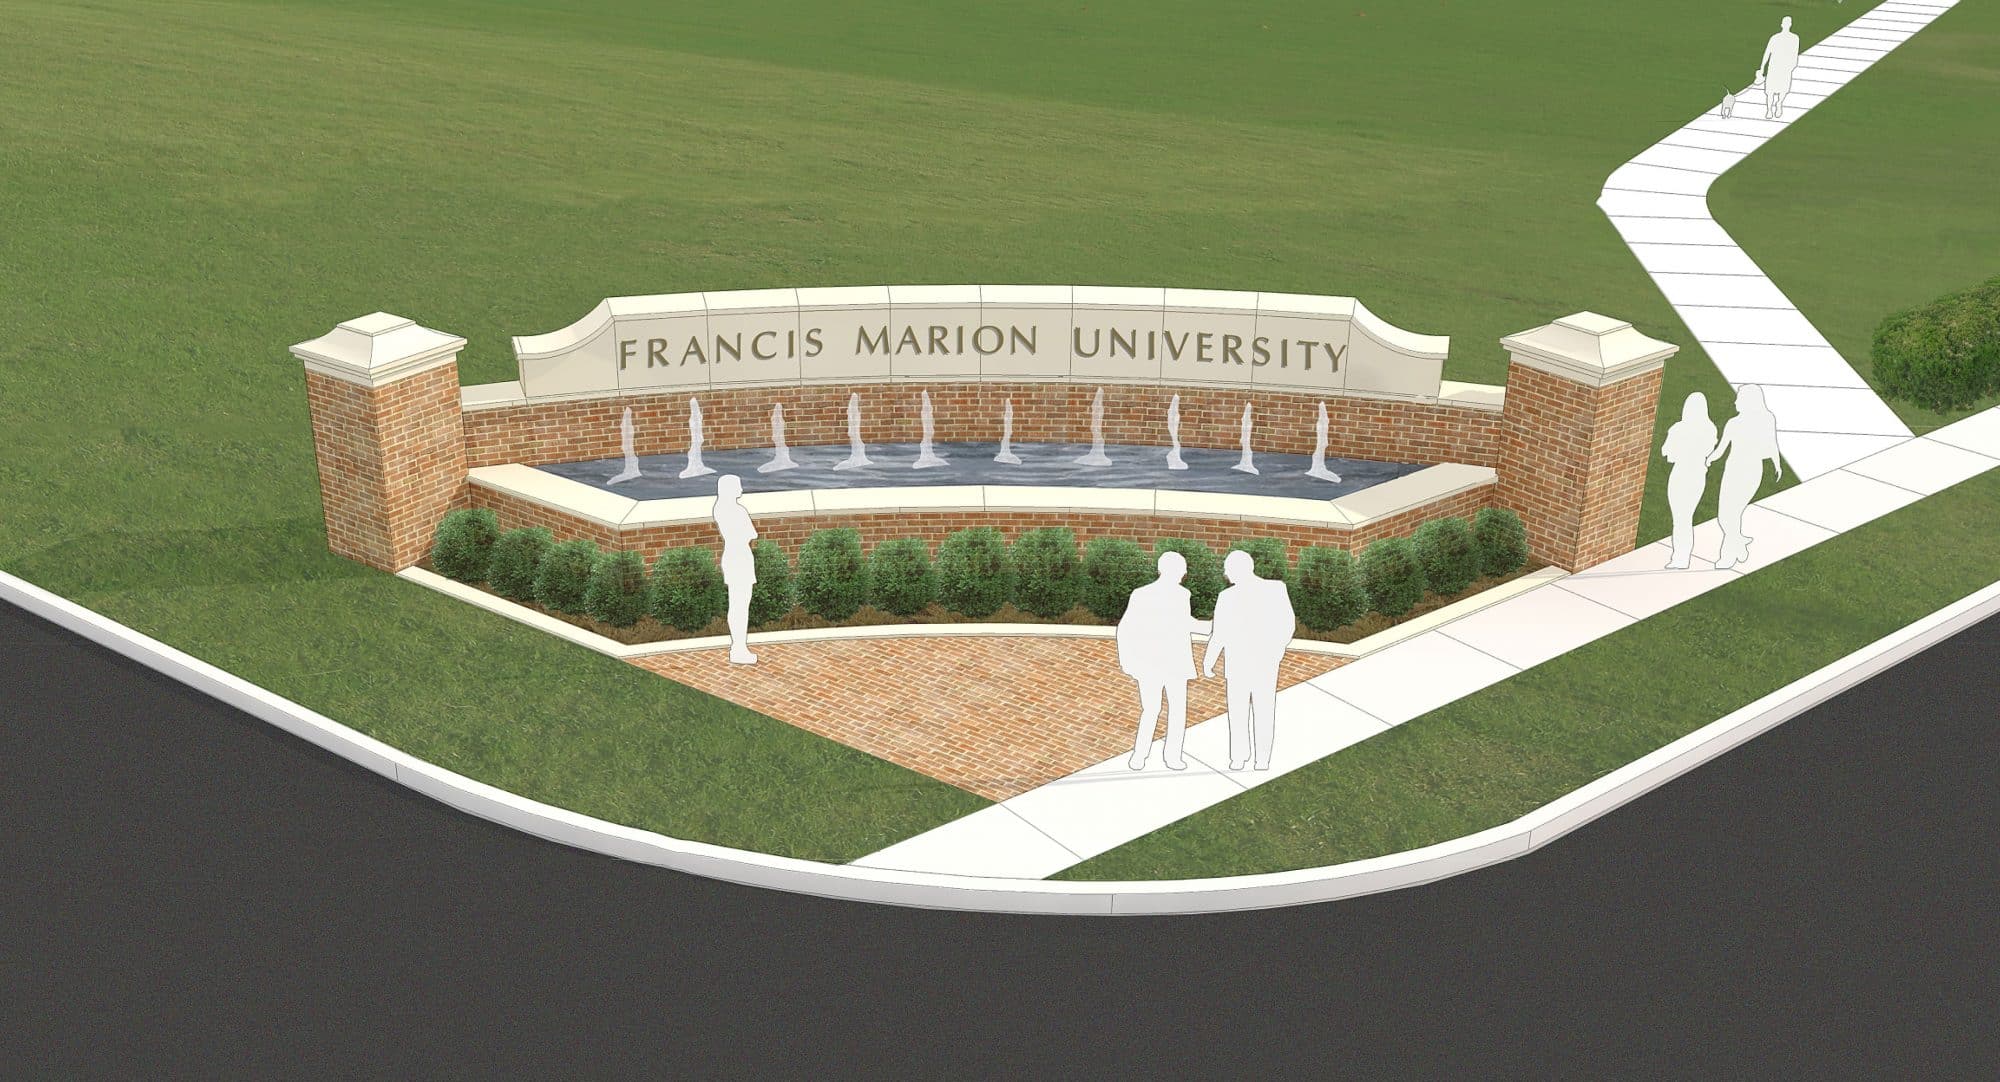 FMU Master Plan includes Honors Center, more downtown development